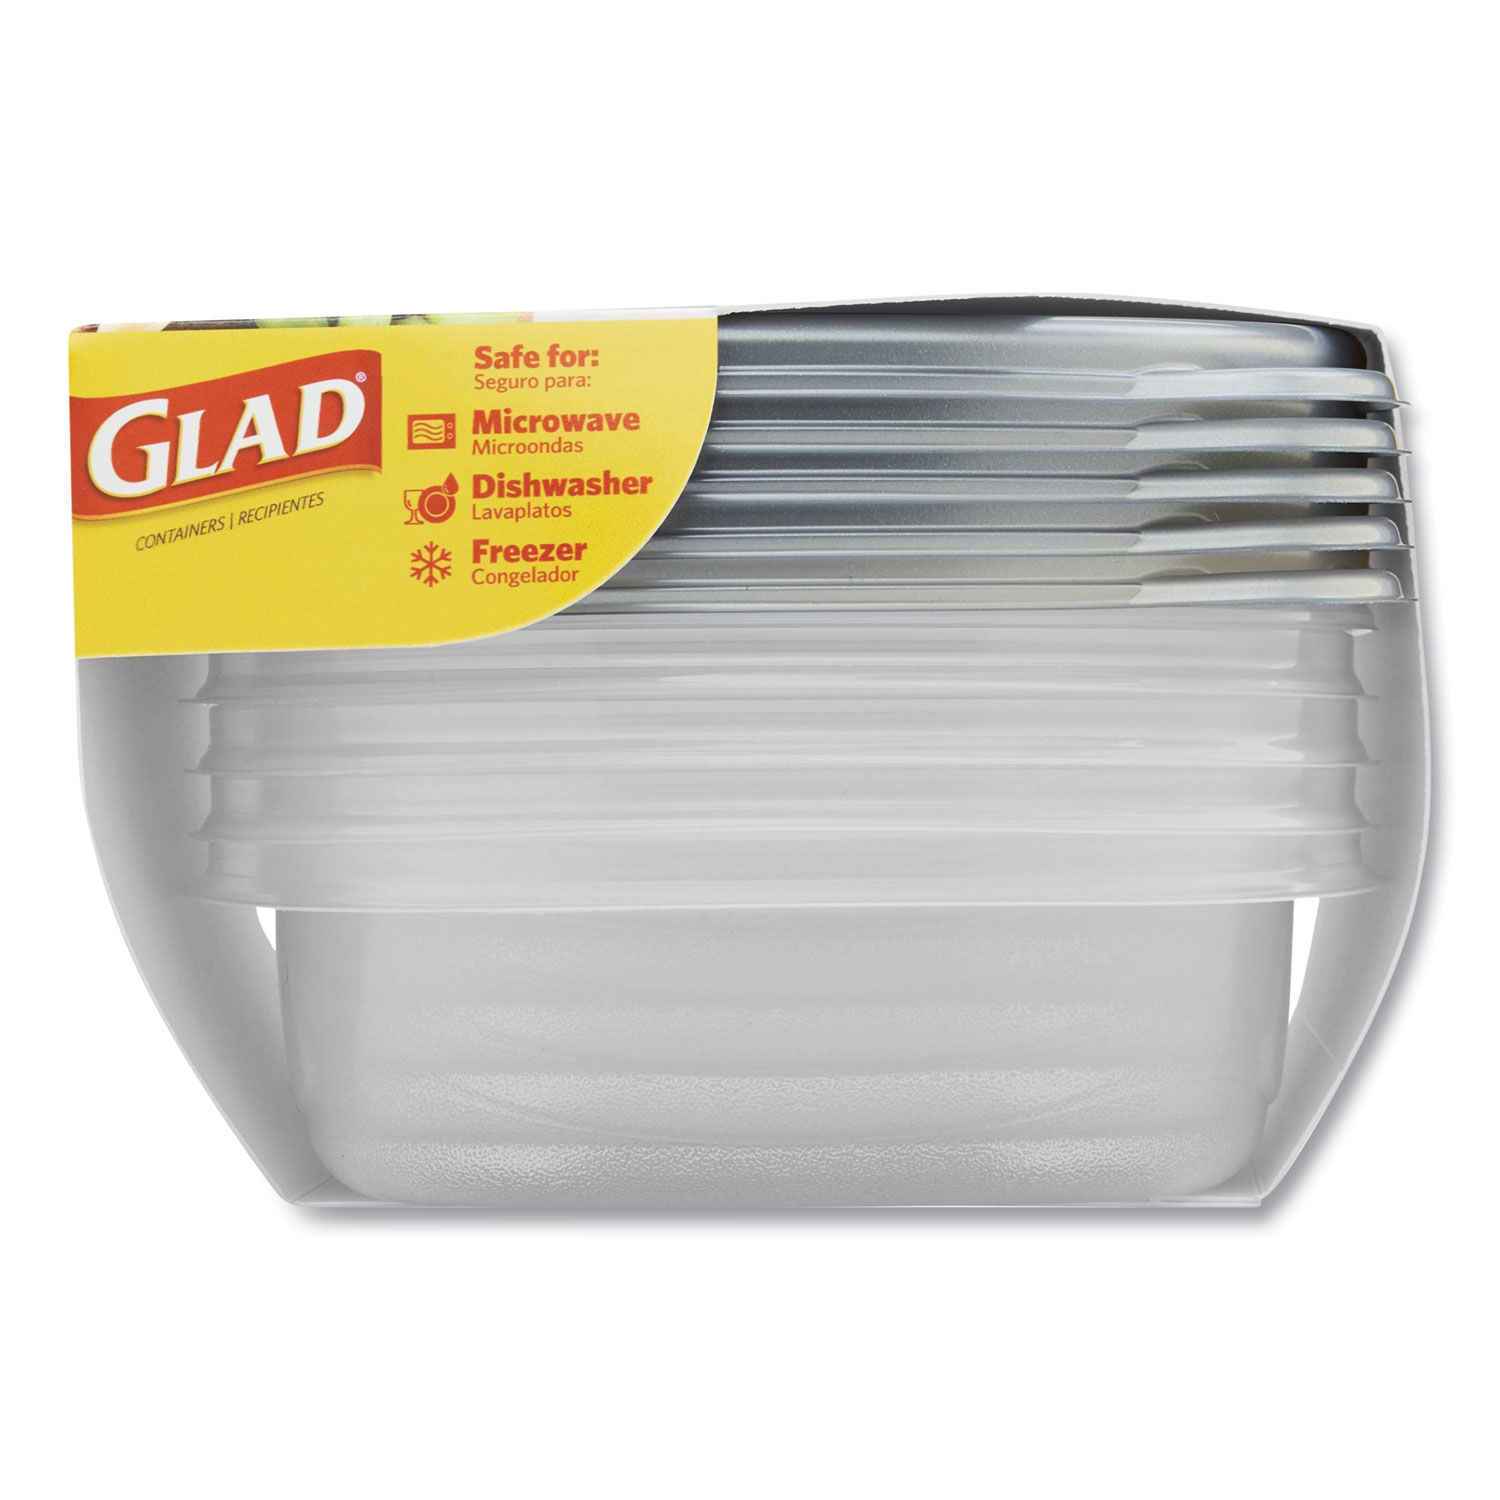 Glad Food Storage Containers at